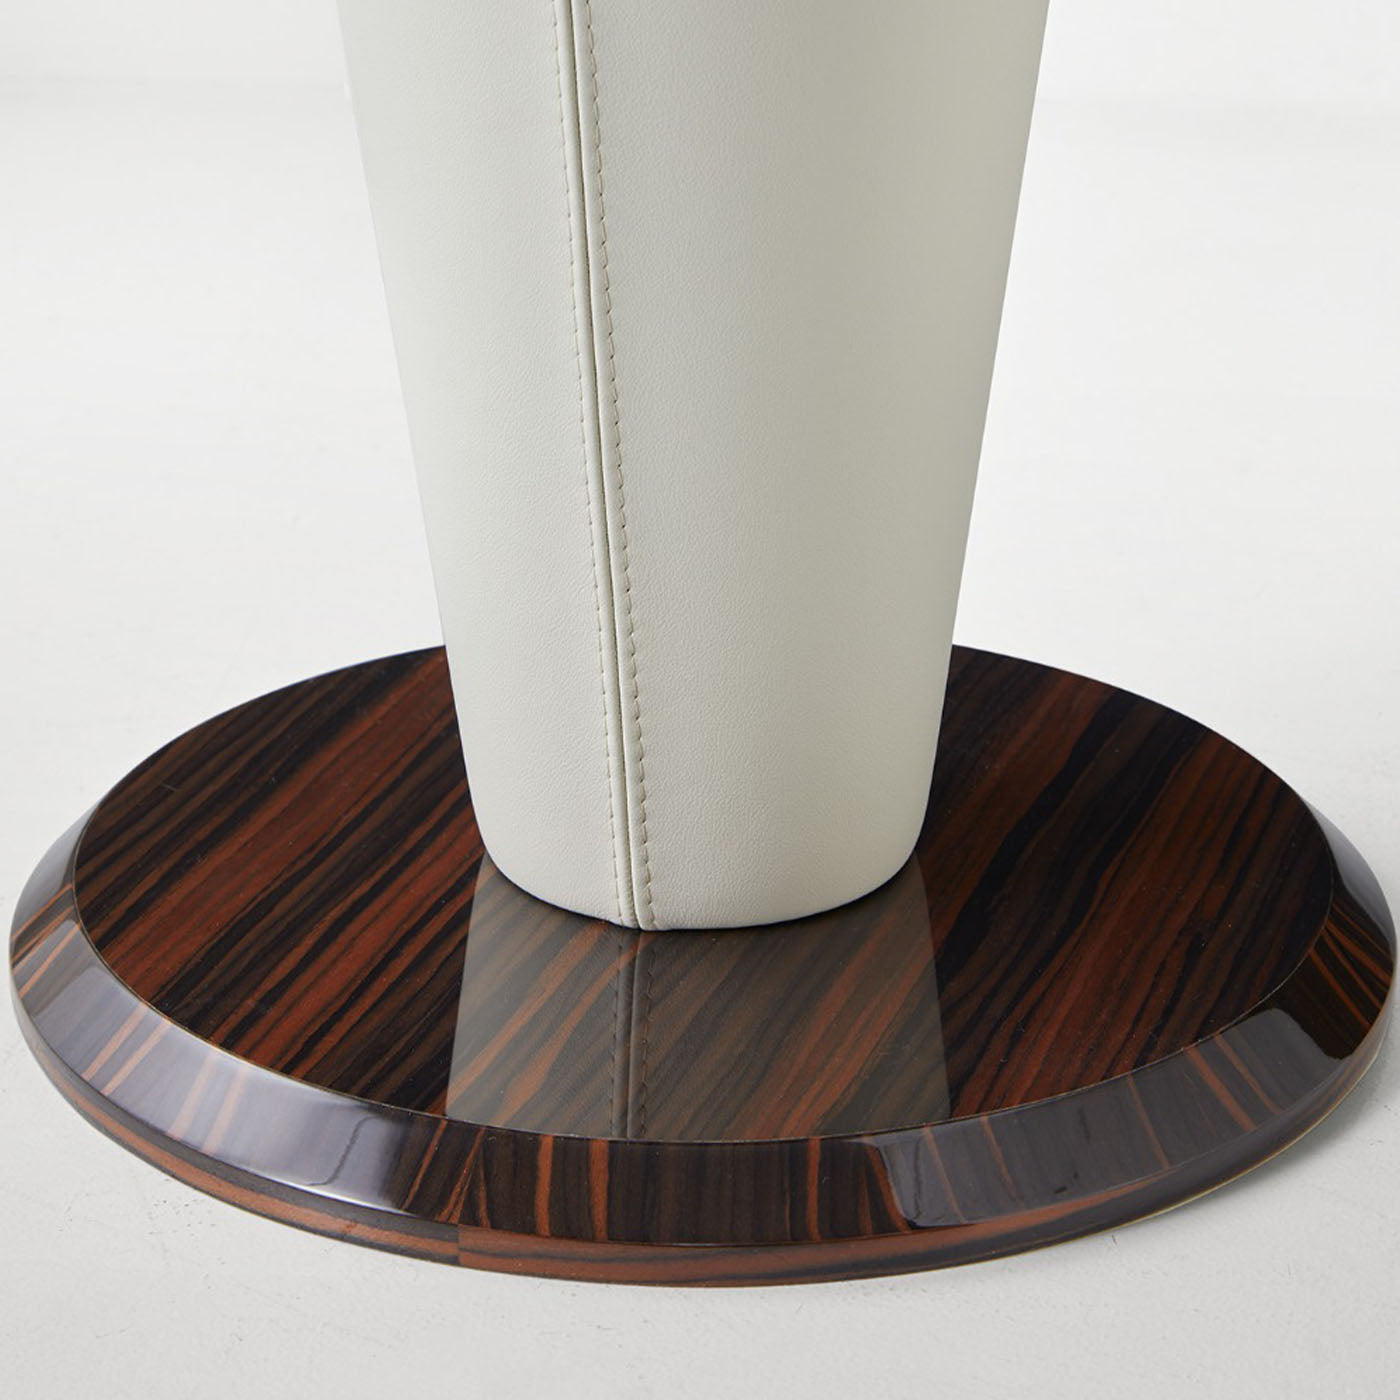 Rocchetto Wood Round Side Table - Alternative view 2